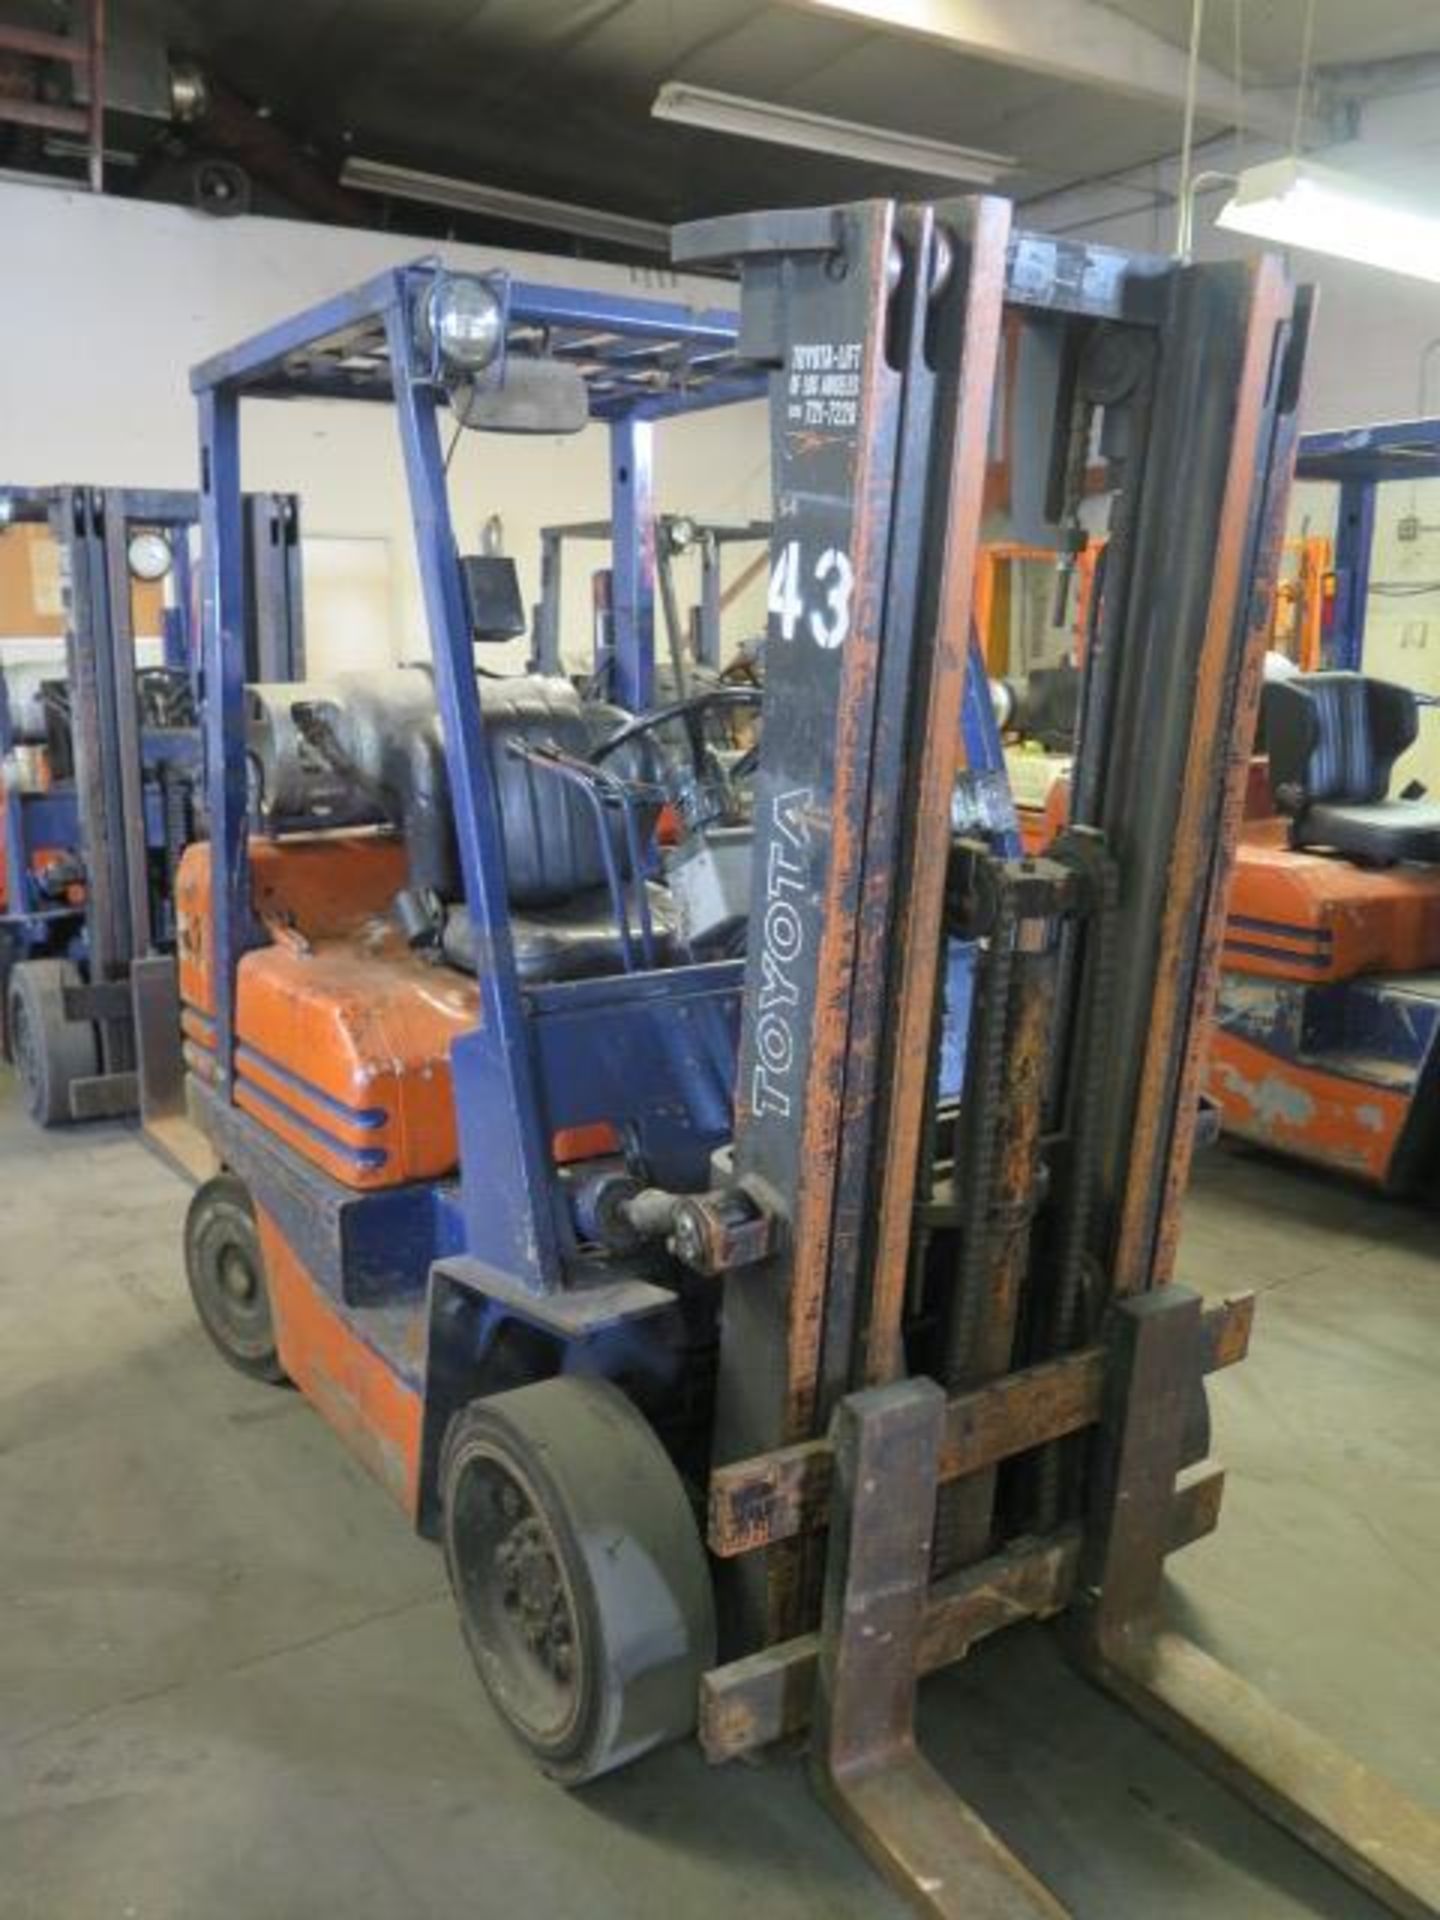 Toyota 5FGC25 5000 Lb Cap LPG Forklift s/n 18534 w/ 3-Stage Mast, 185” Lift Height, Cushion Tires - Image 2 of 10